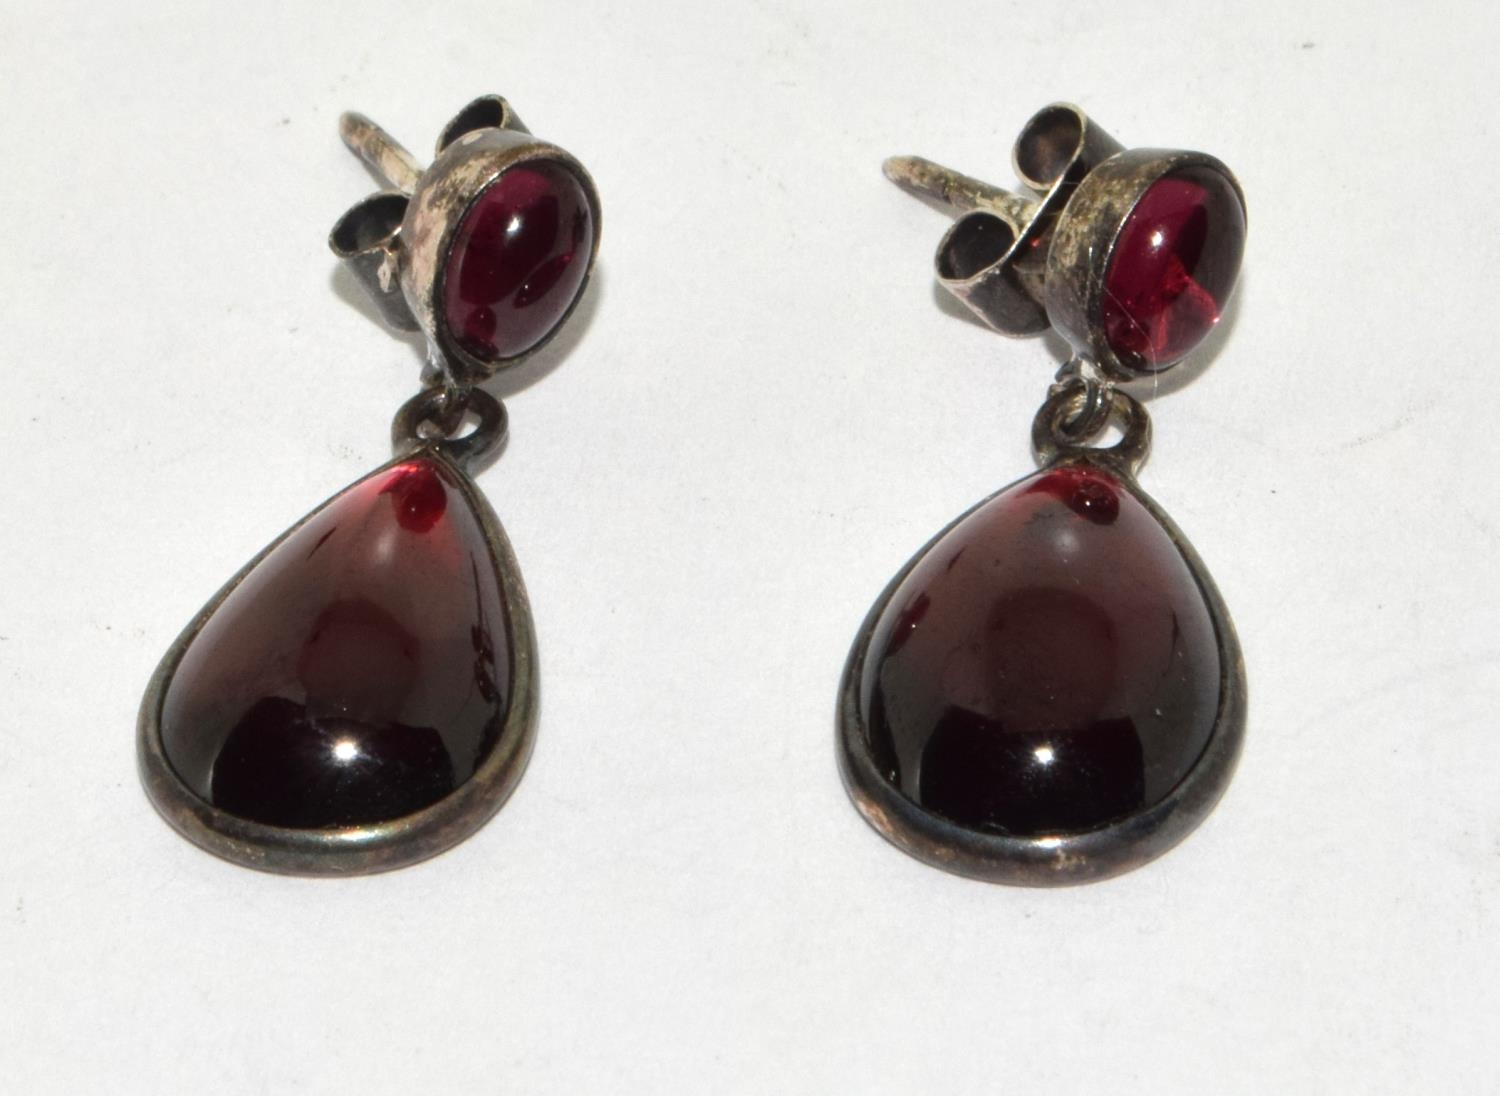 Large natural cabochon pear shaped garnet and silver drop earrings.